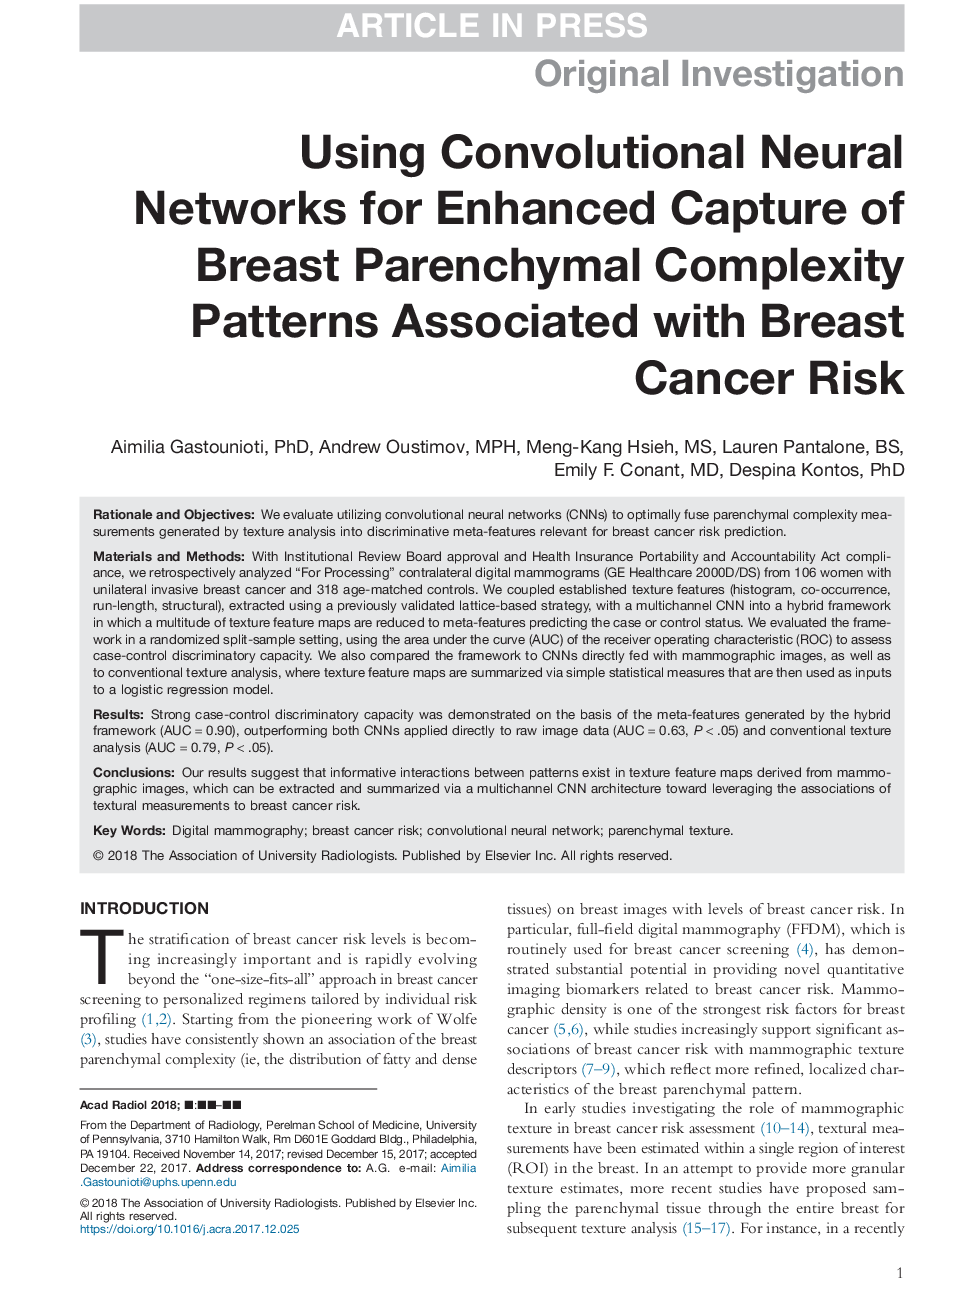 Using Convolutional Neural Networks for Enhanced Capture of Breast Parenchymal Complexity Patterns Associated with Breast Cancer Risk